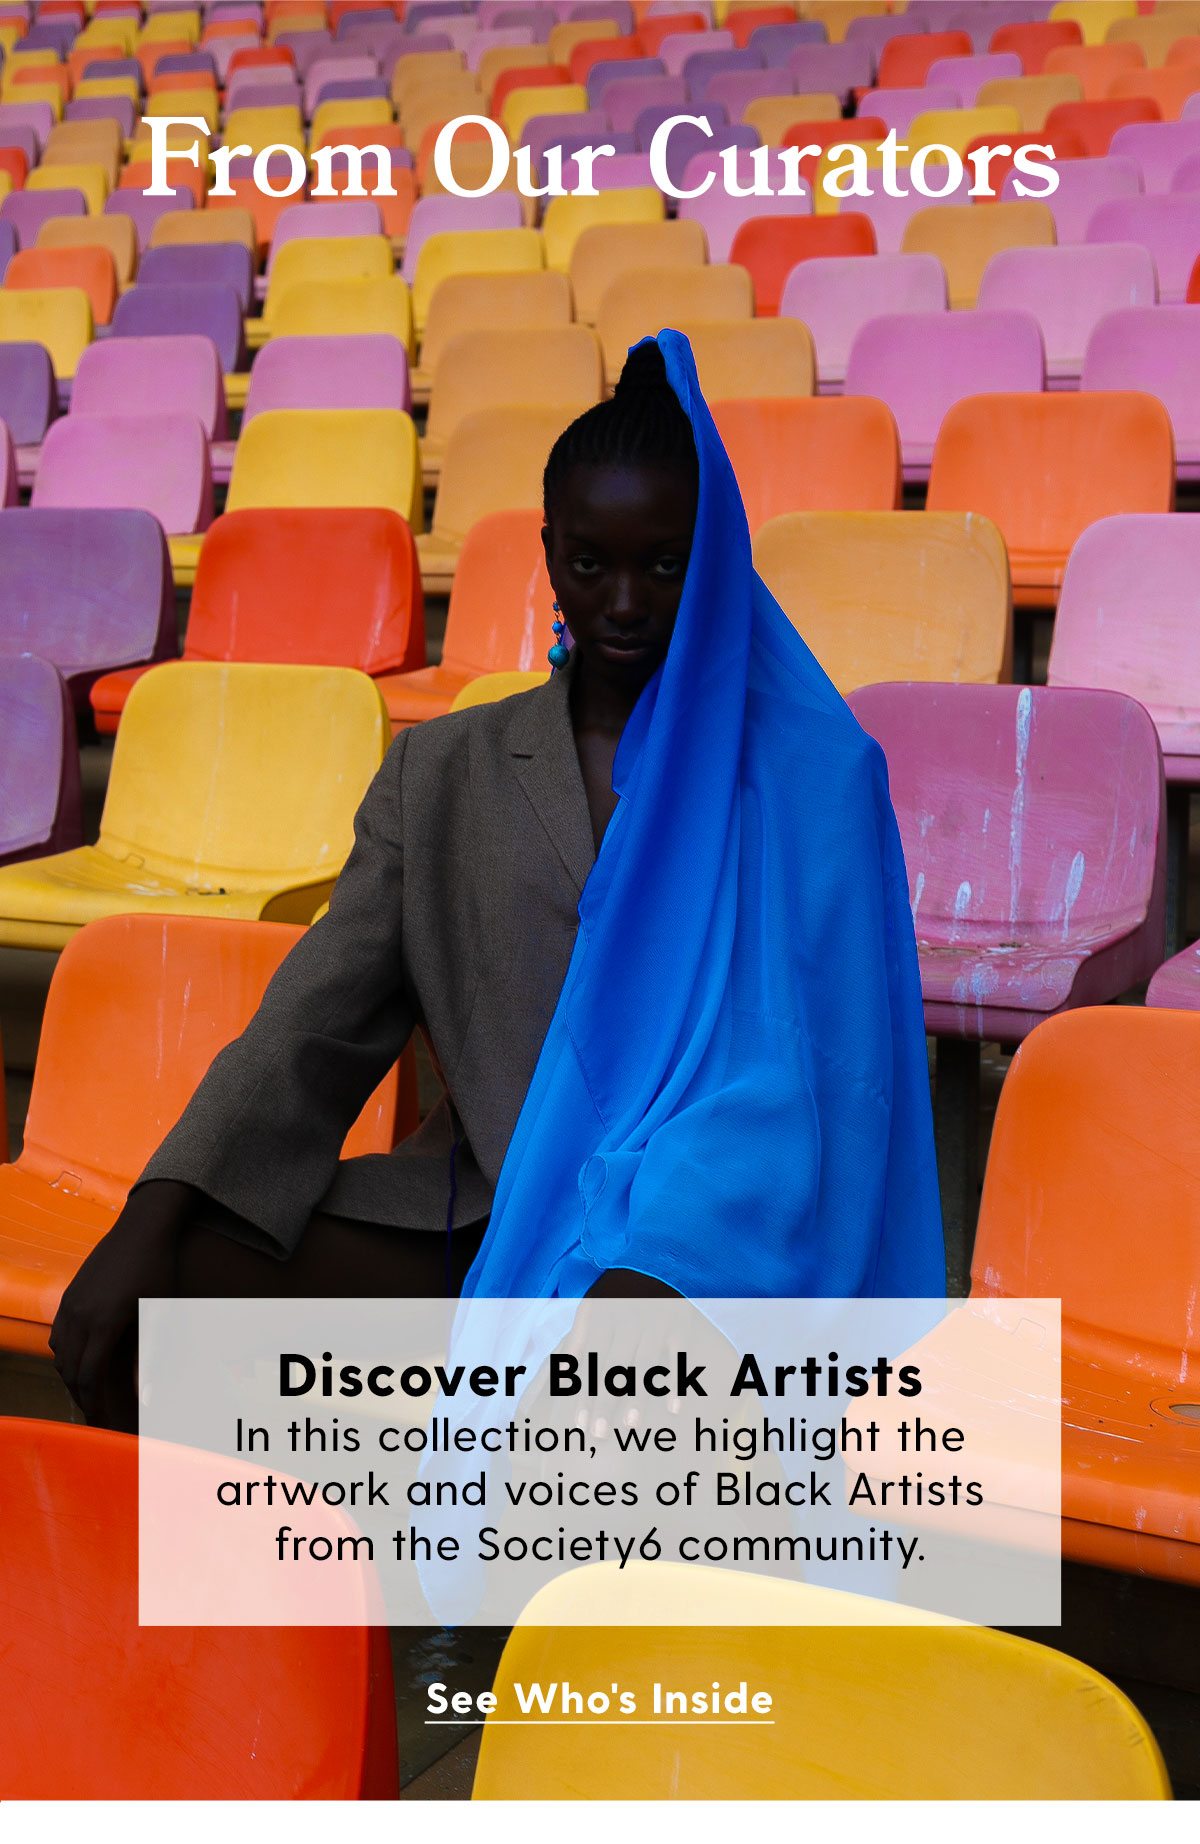 From Our Curators: Discover Black Artists. In this collection, we highlight the artwork and voices of Black Artists from the Society6 community. See Who's Inside